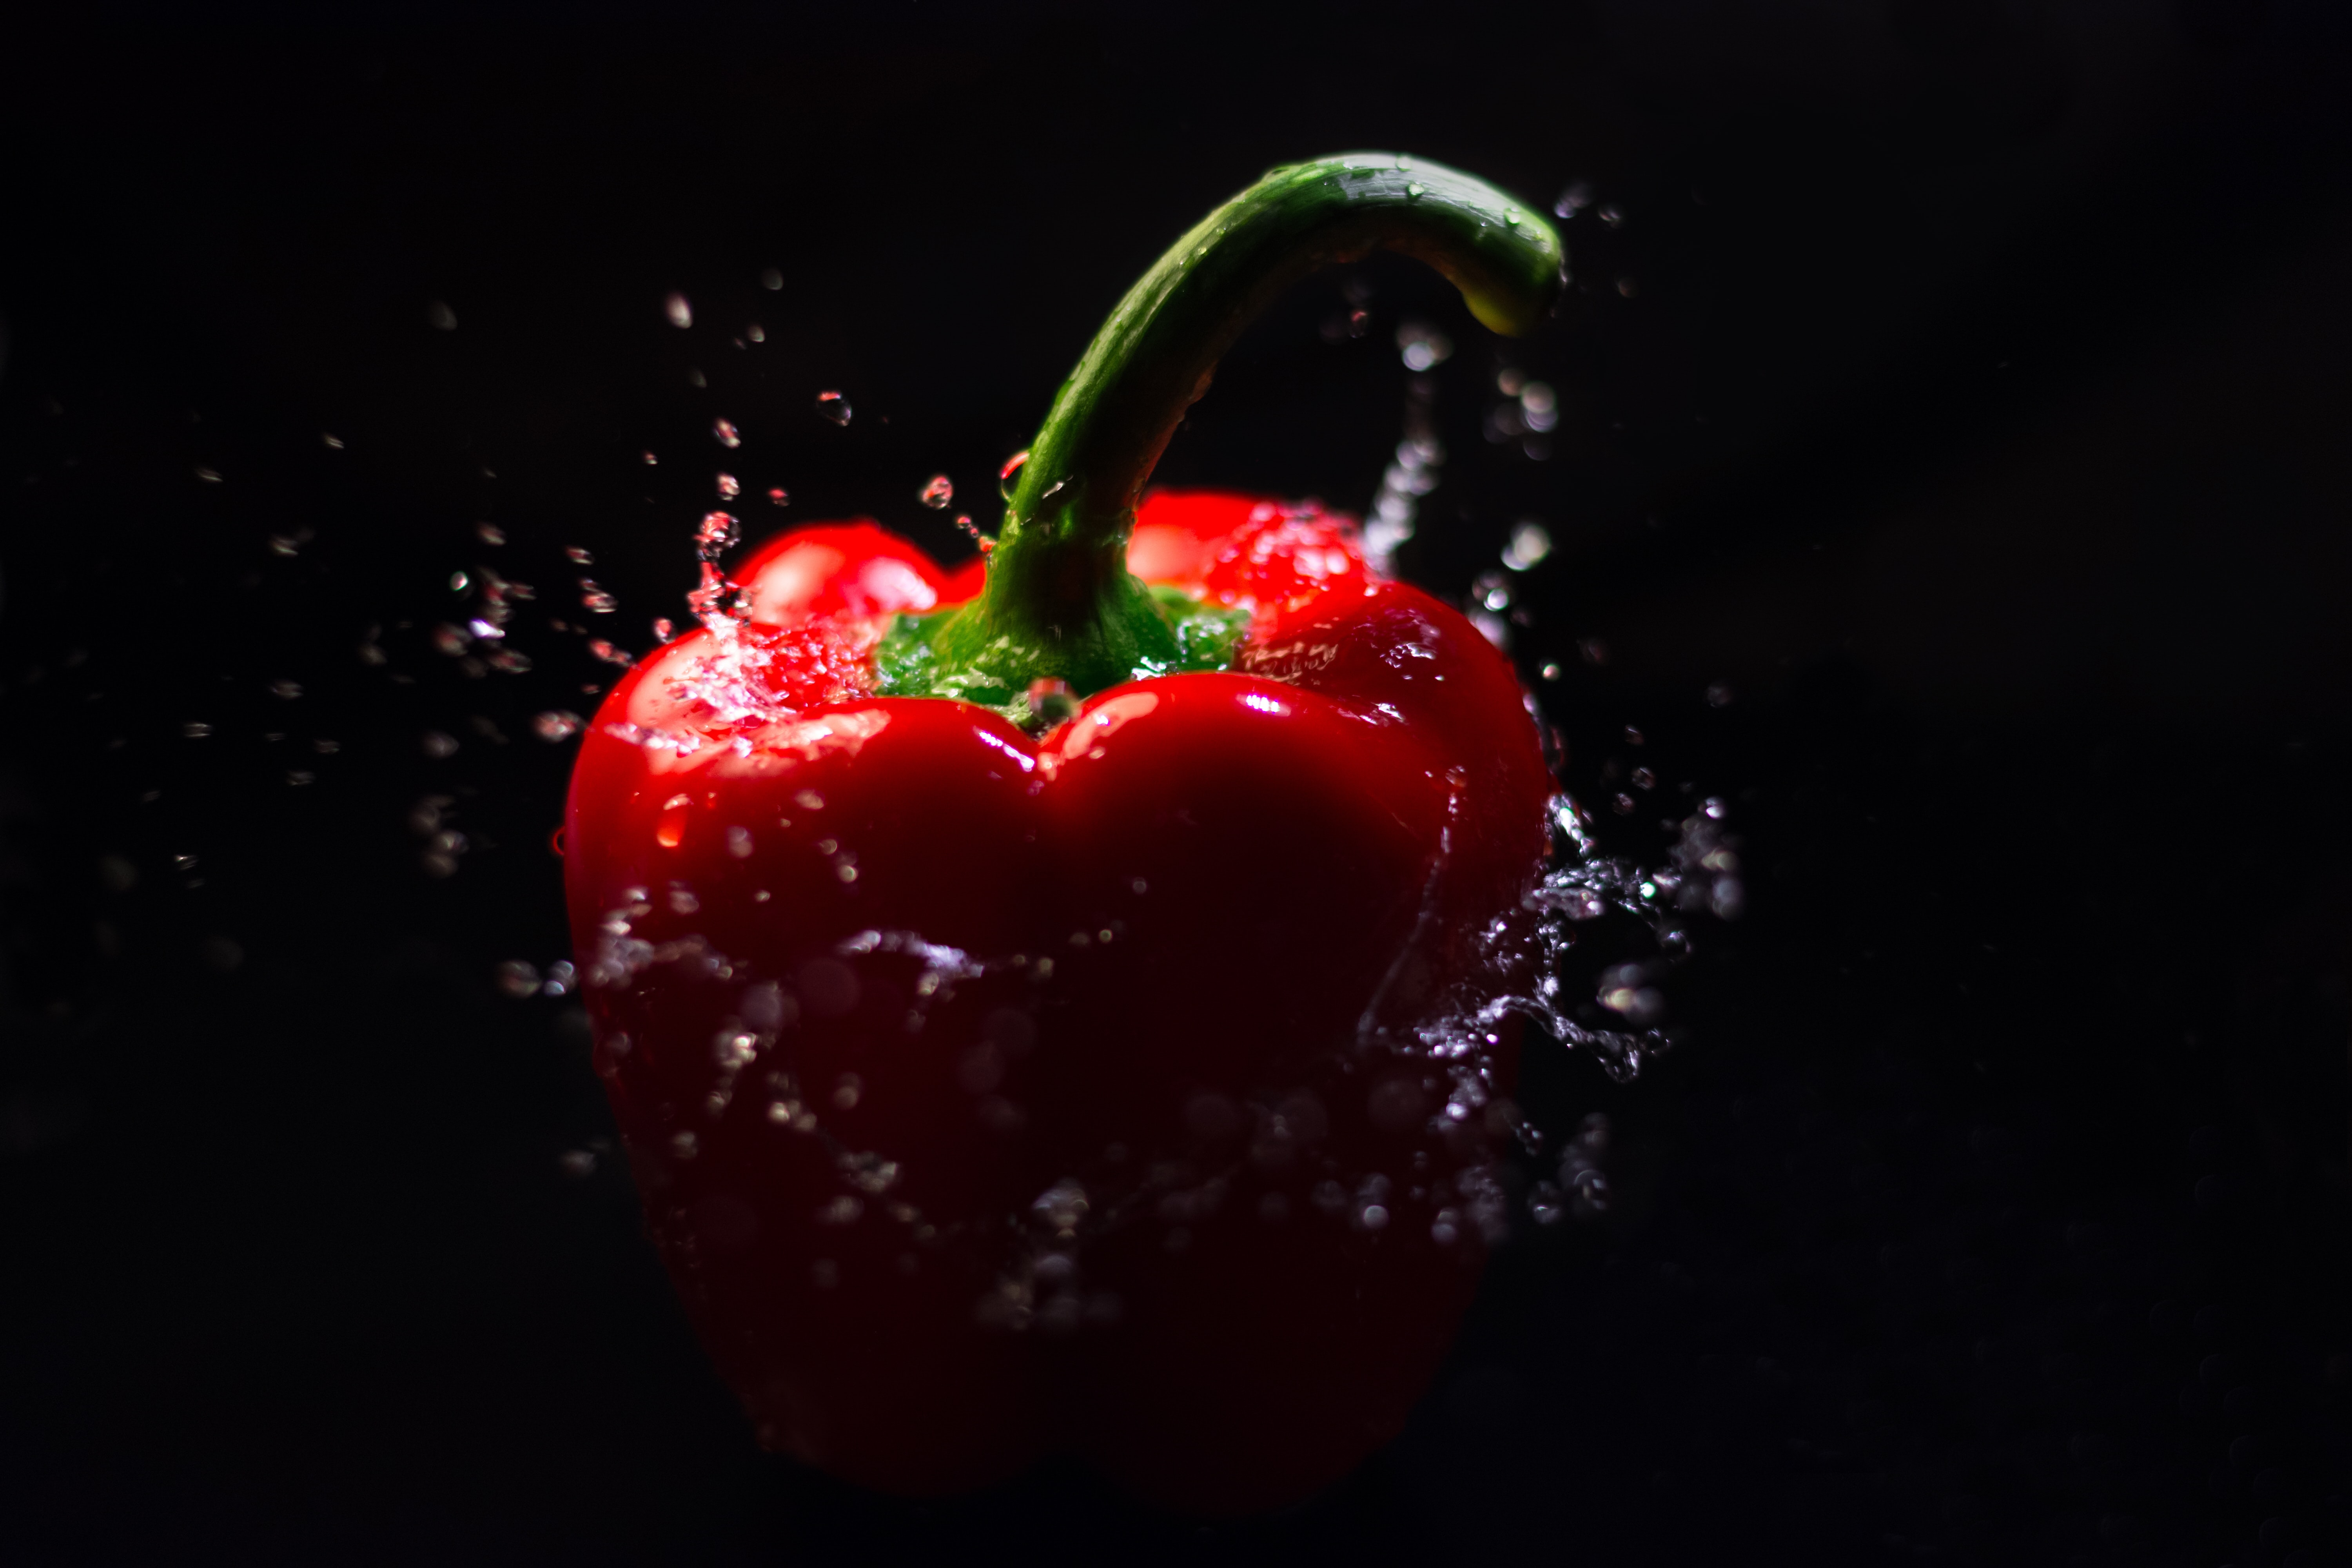 A red bell pepper splashing into water in front of a dark black background.